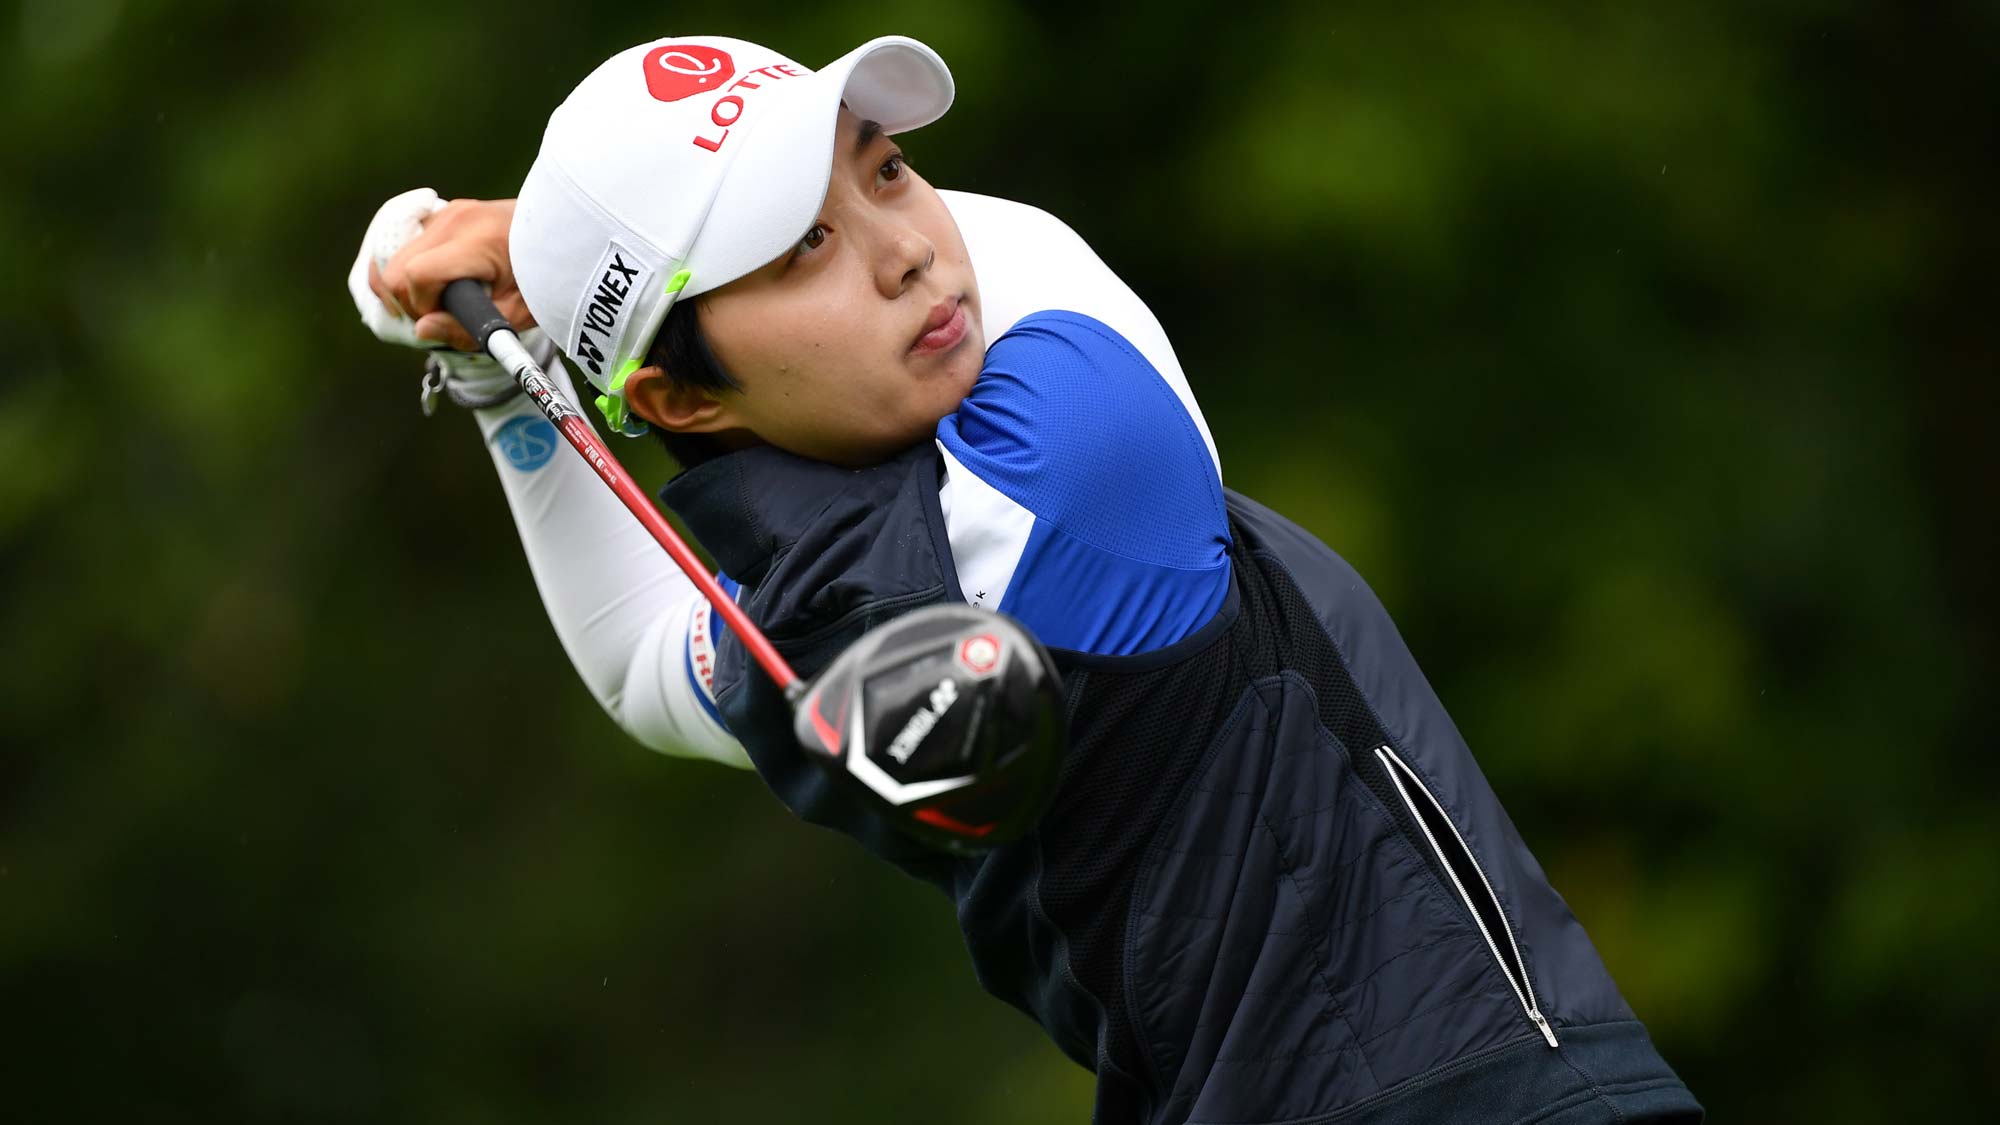 Hyo Joo Kim of South Korea in action on the 9th hole during day 4 of the Evian Championship